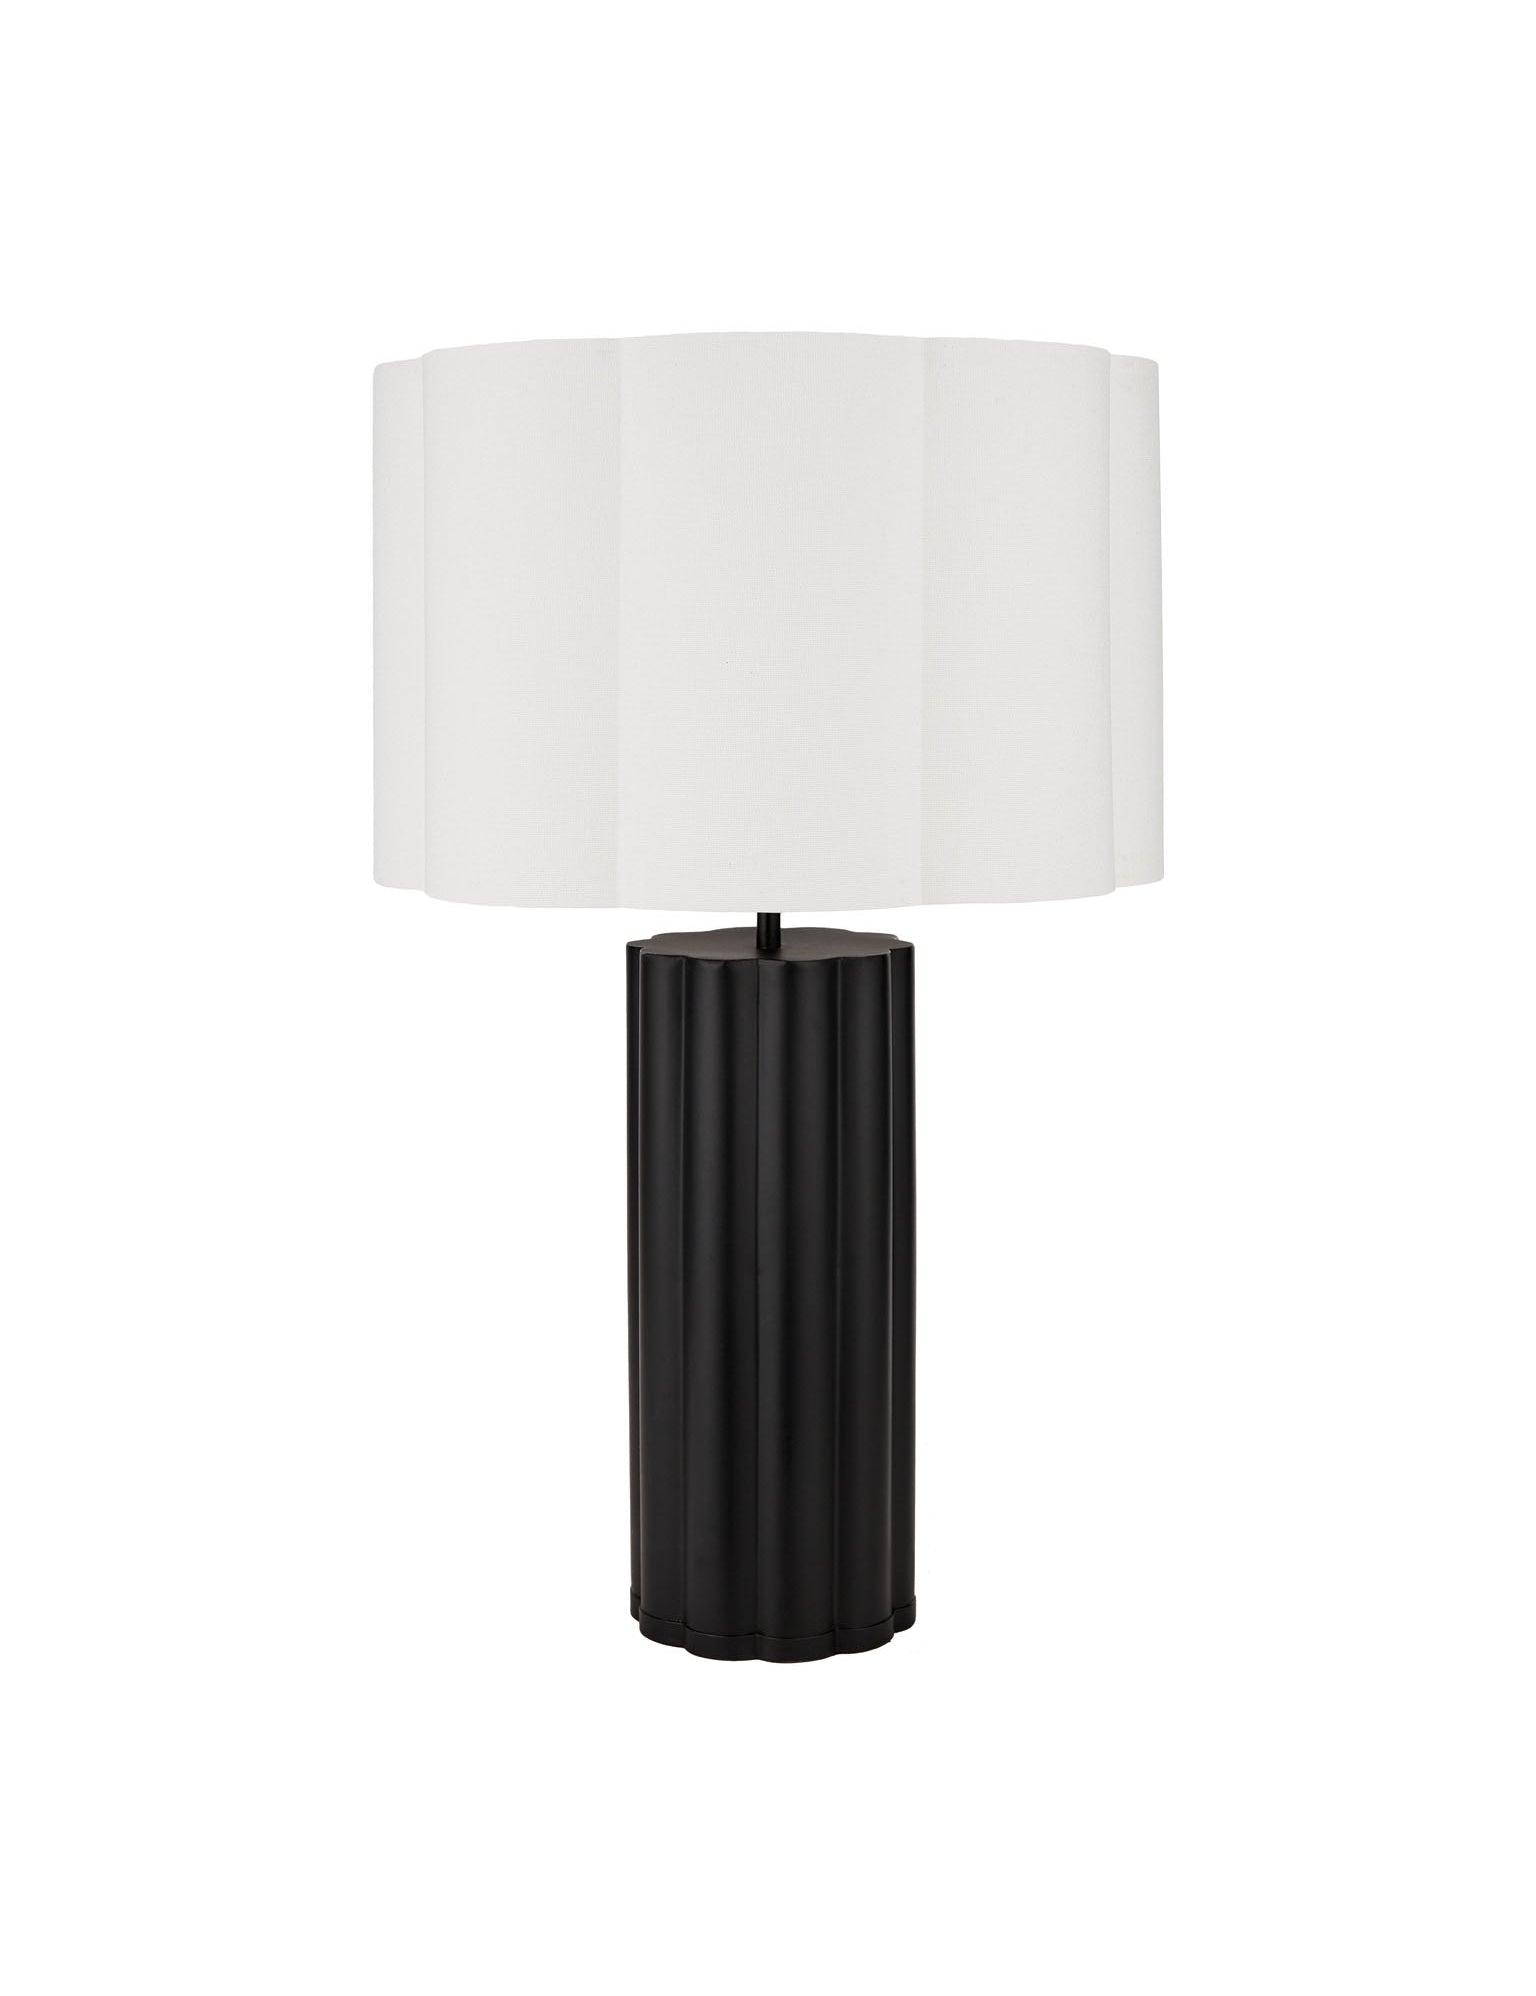 black metal lamp base with a scalloped white shade